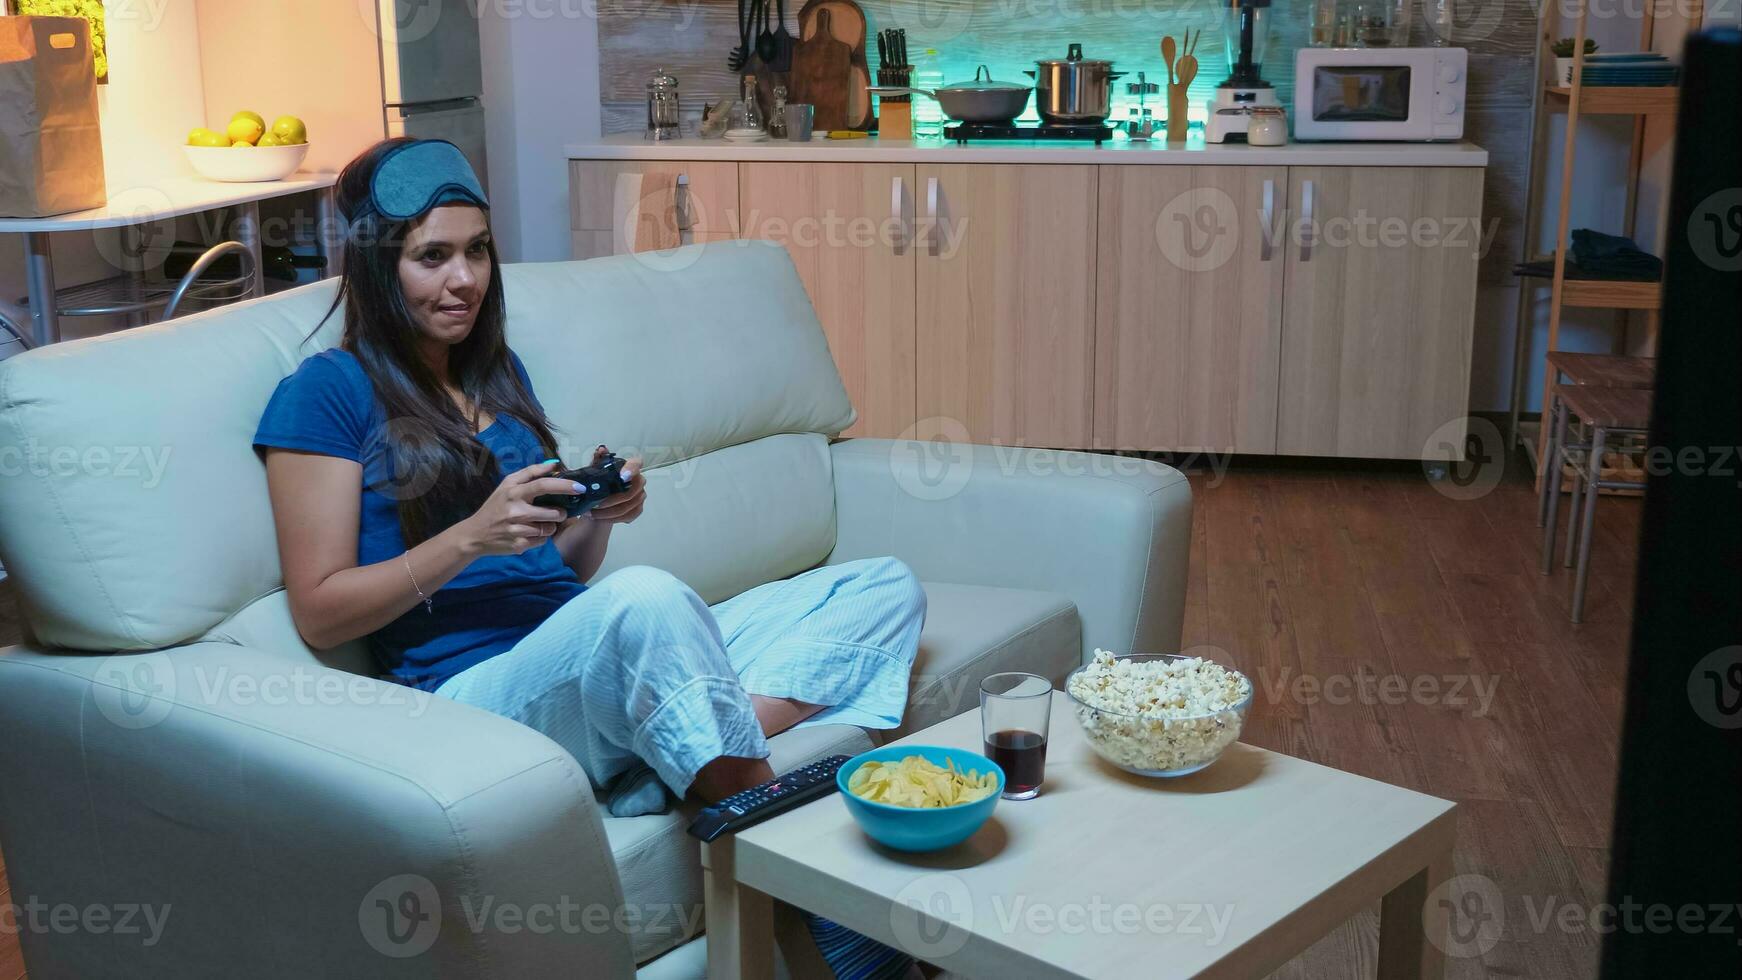 Woman sitting on sofa playing video game late at night wering eye mask on forehead. Excited determined gamer using controller joysticks keypad playstation gaming and having fun winning electronic game photo